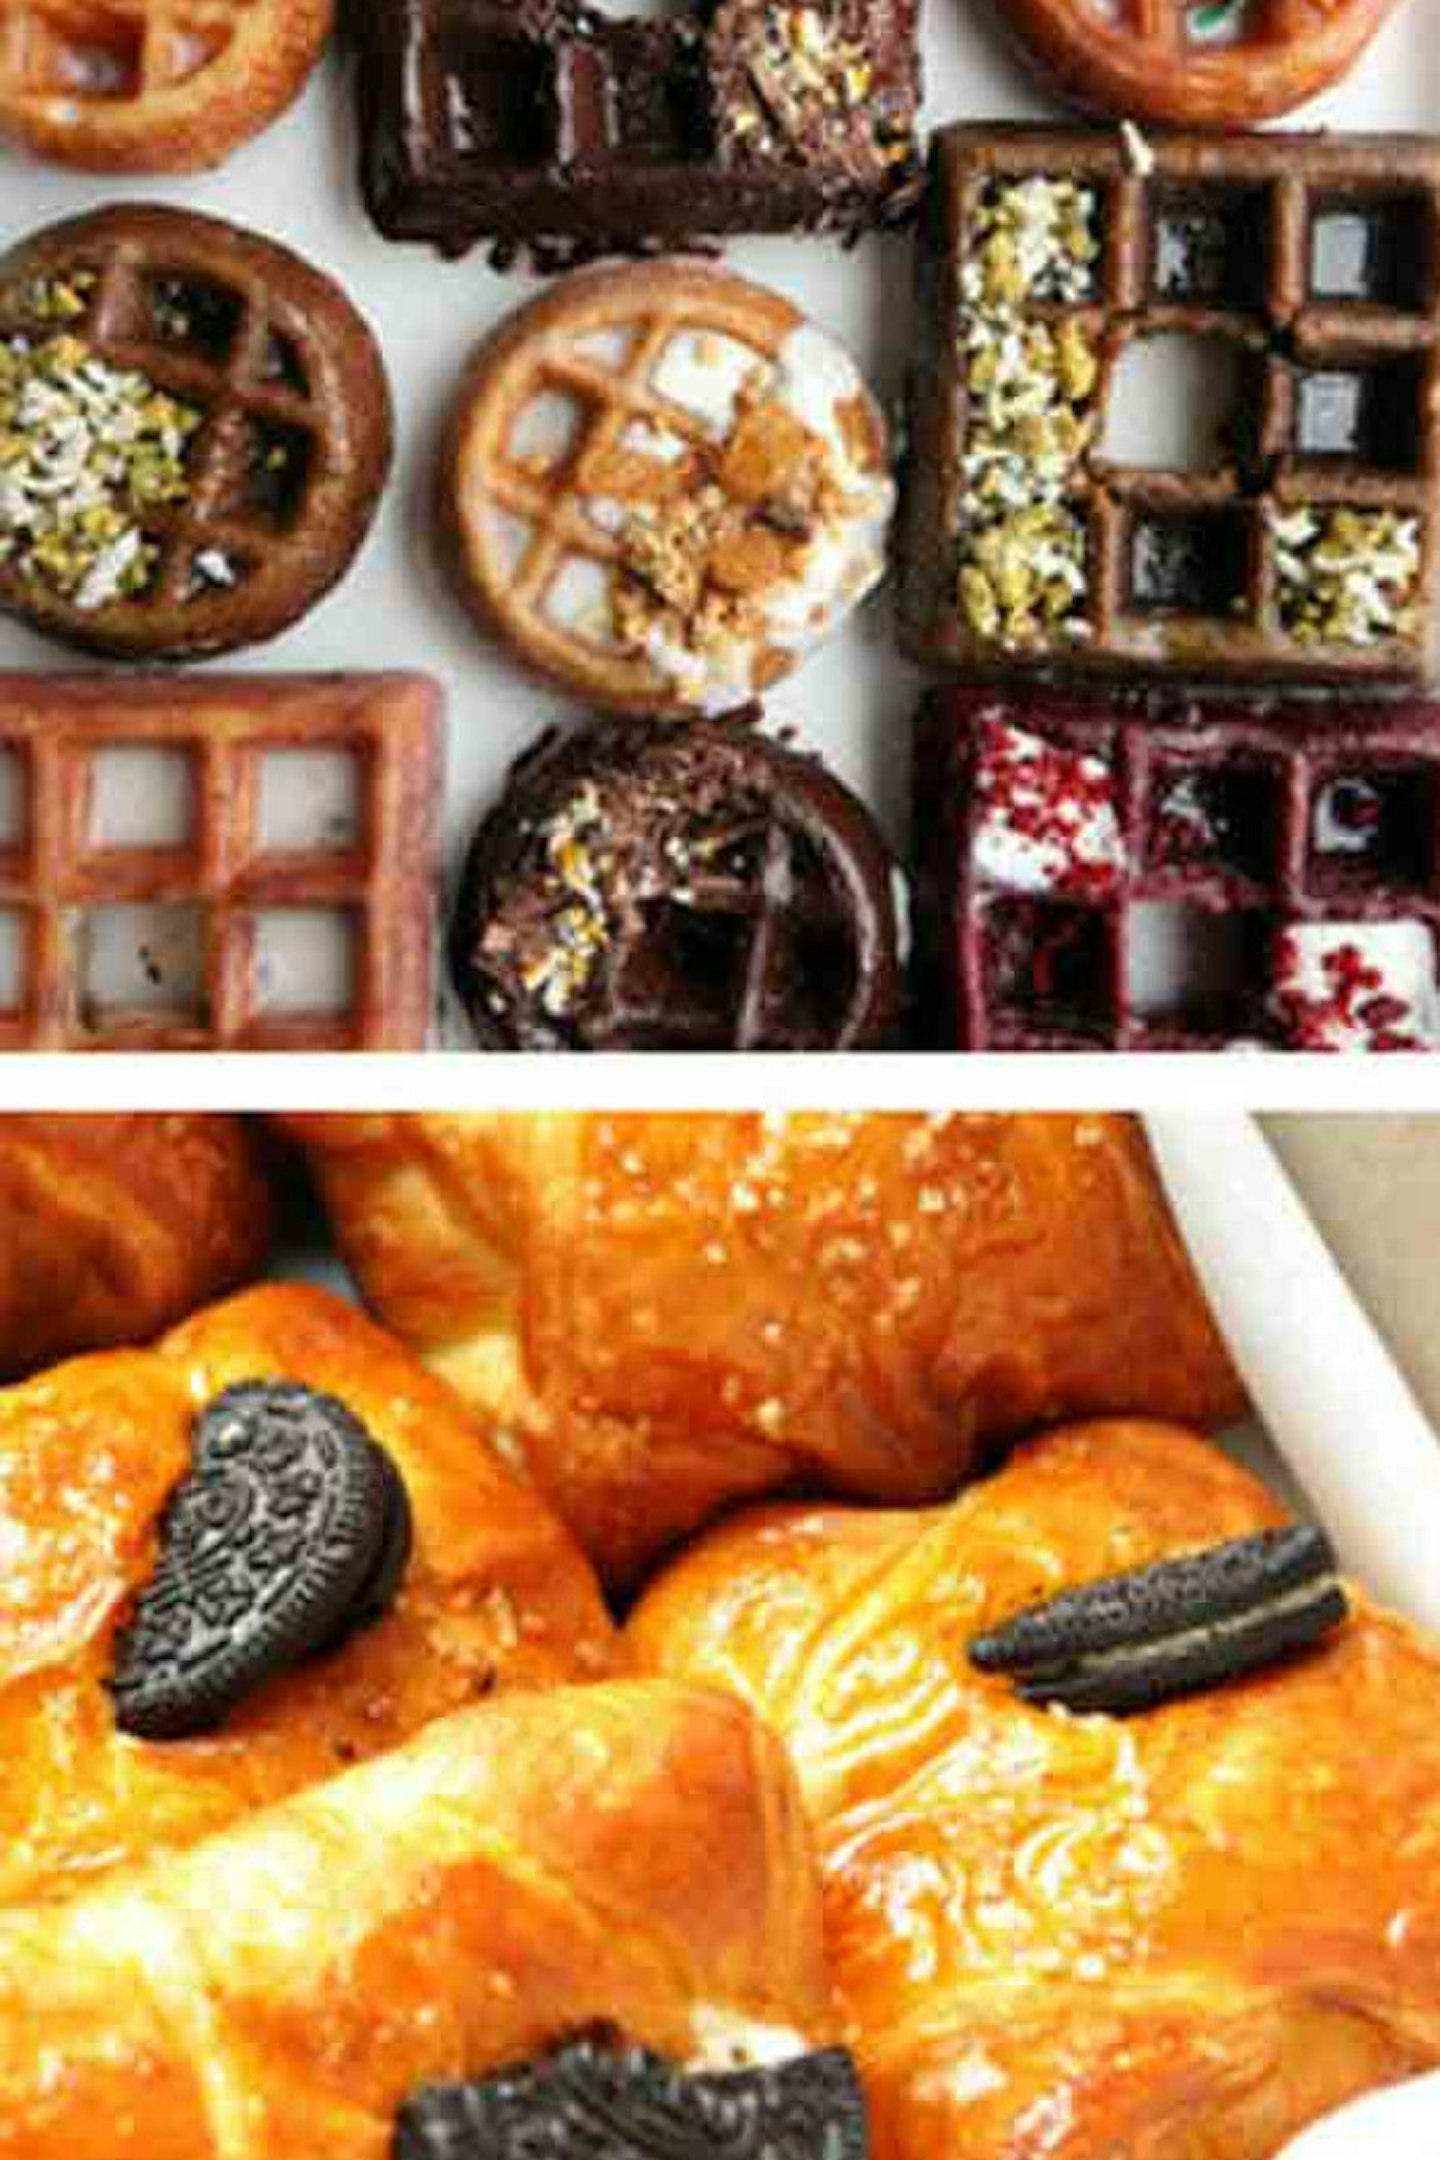 MOVE OVER THE CRONUT! GALLERY OF THE TOP NEW FOOD MASHUPS